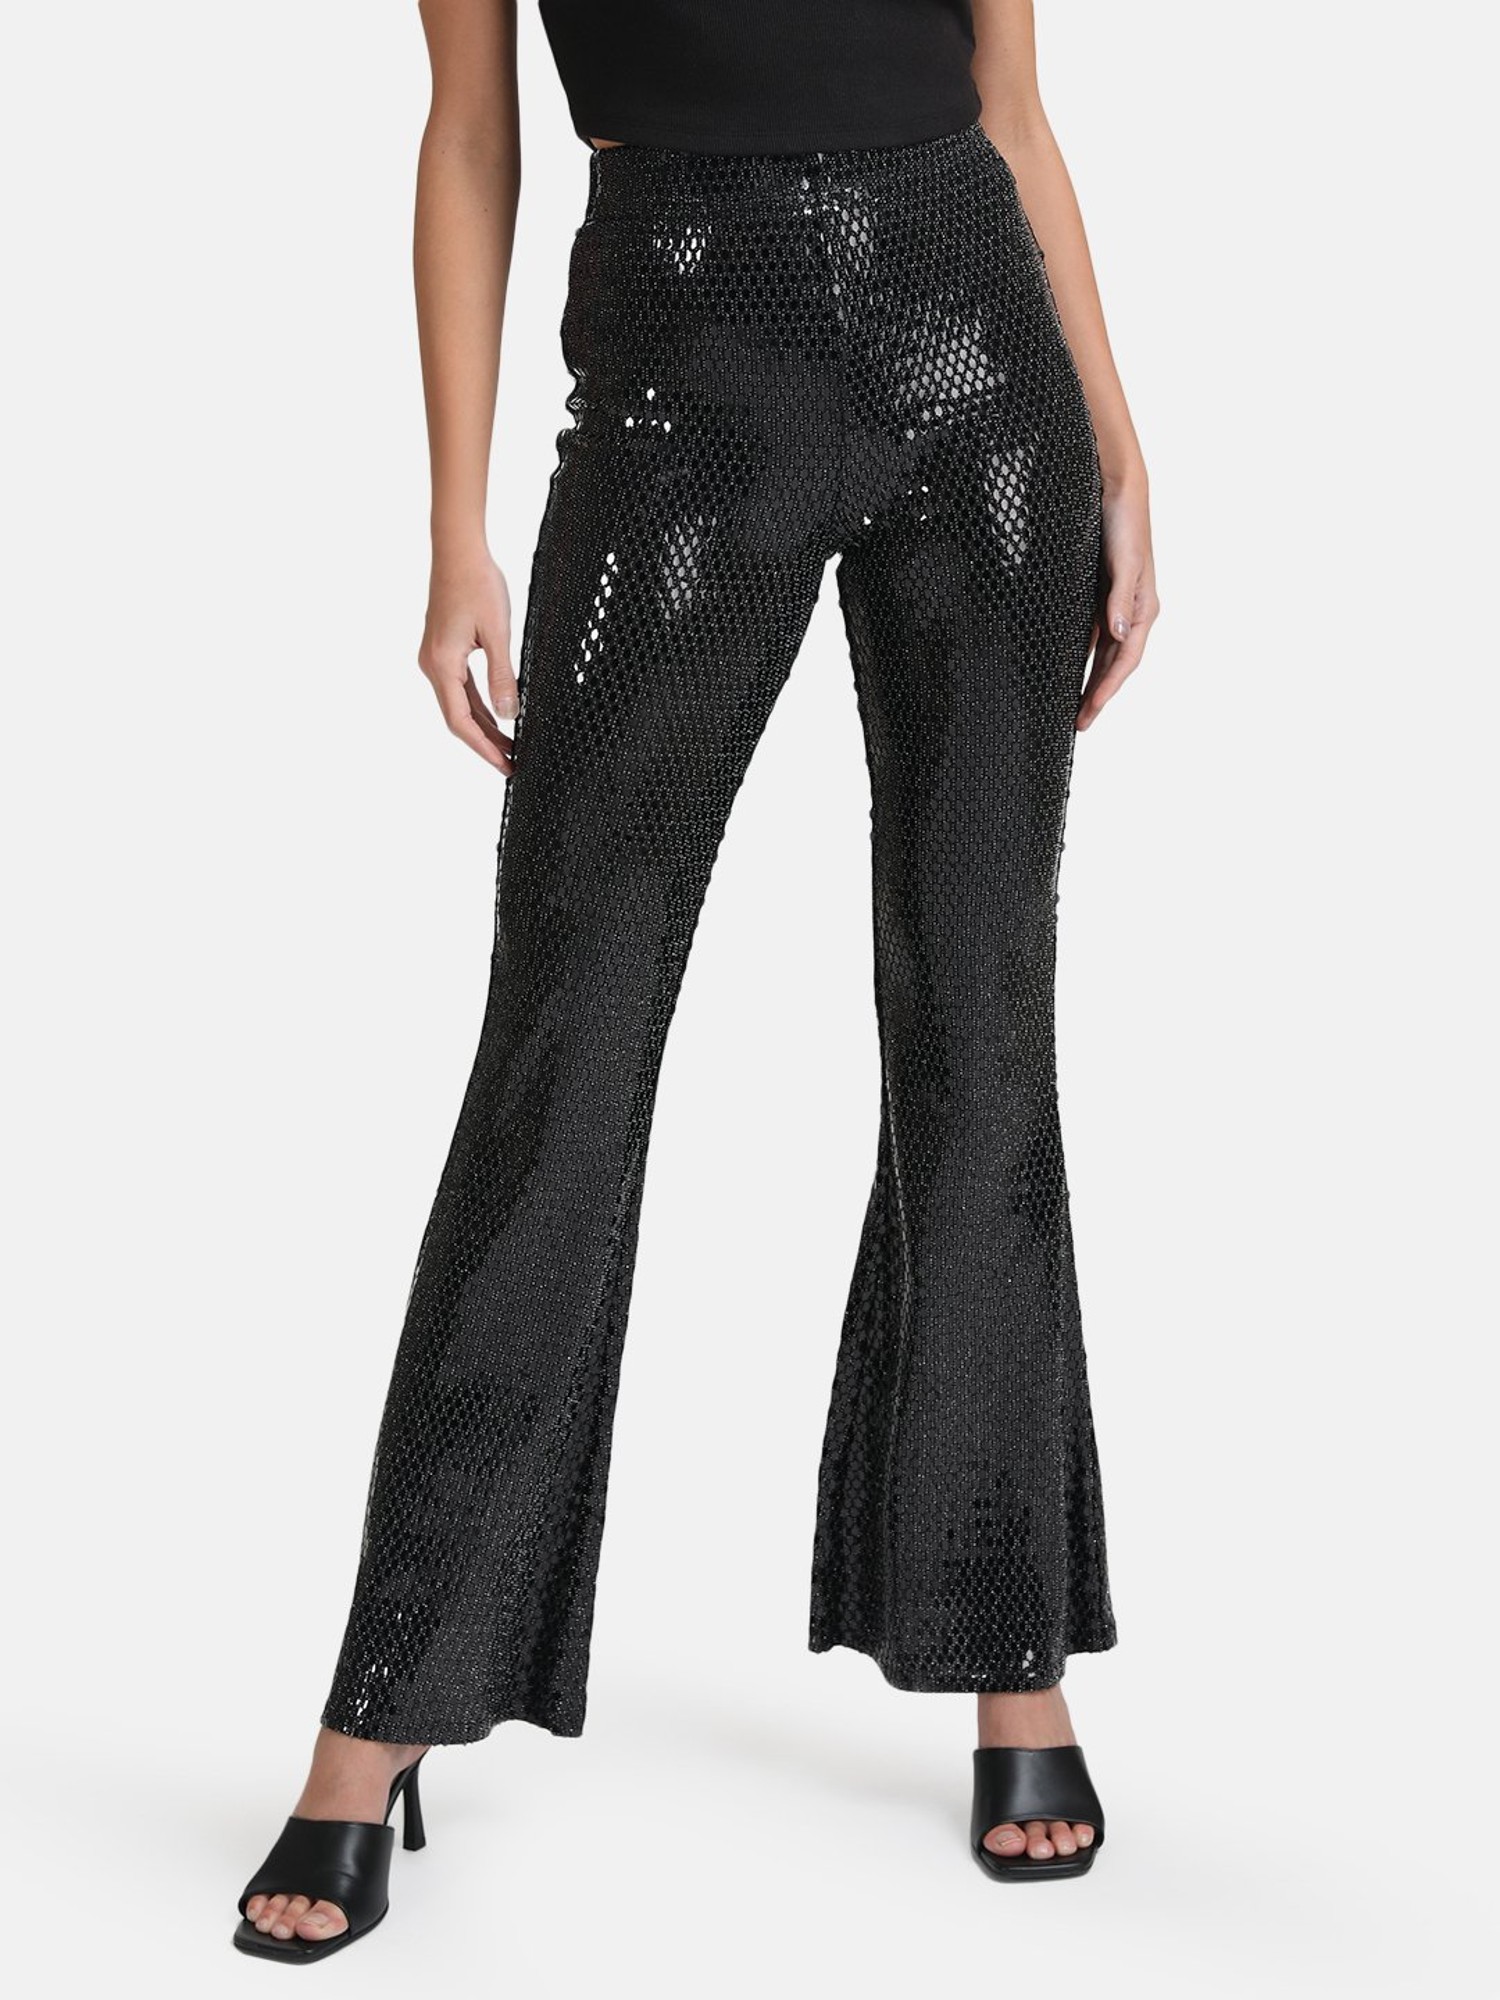 Buy BLENCOT Bell Bottoms for Women High Waisted Wide Leg Palazzo Pants  Bling Sequin Flared Trousers Apricot Small at Amazonin